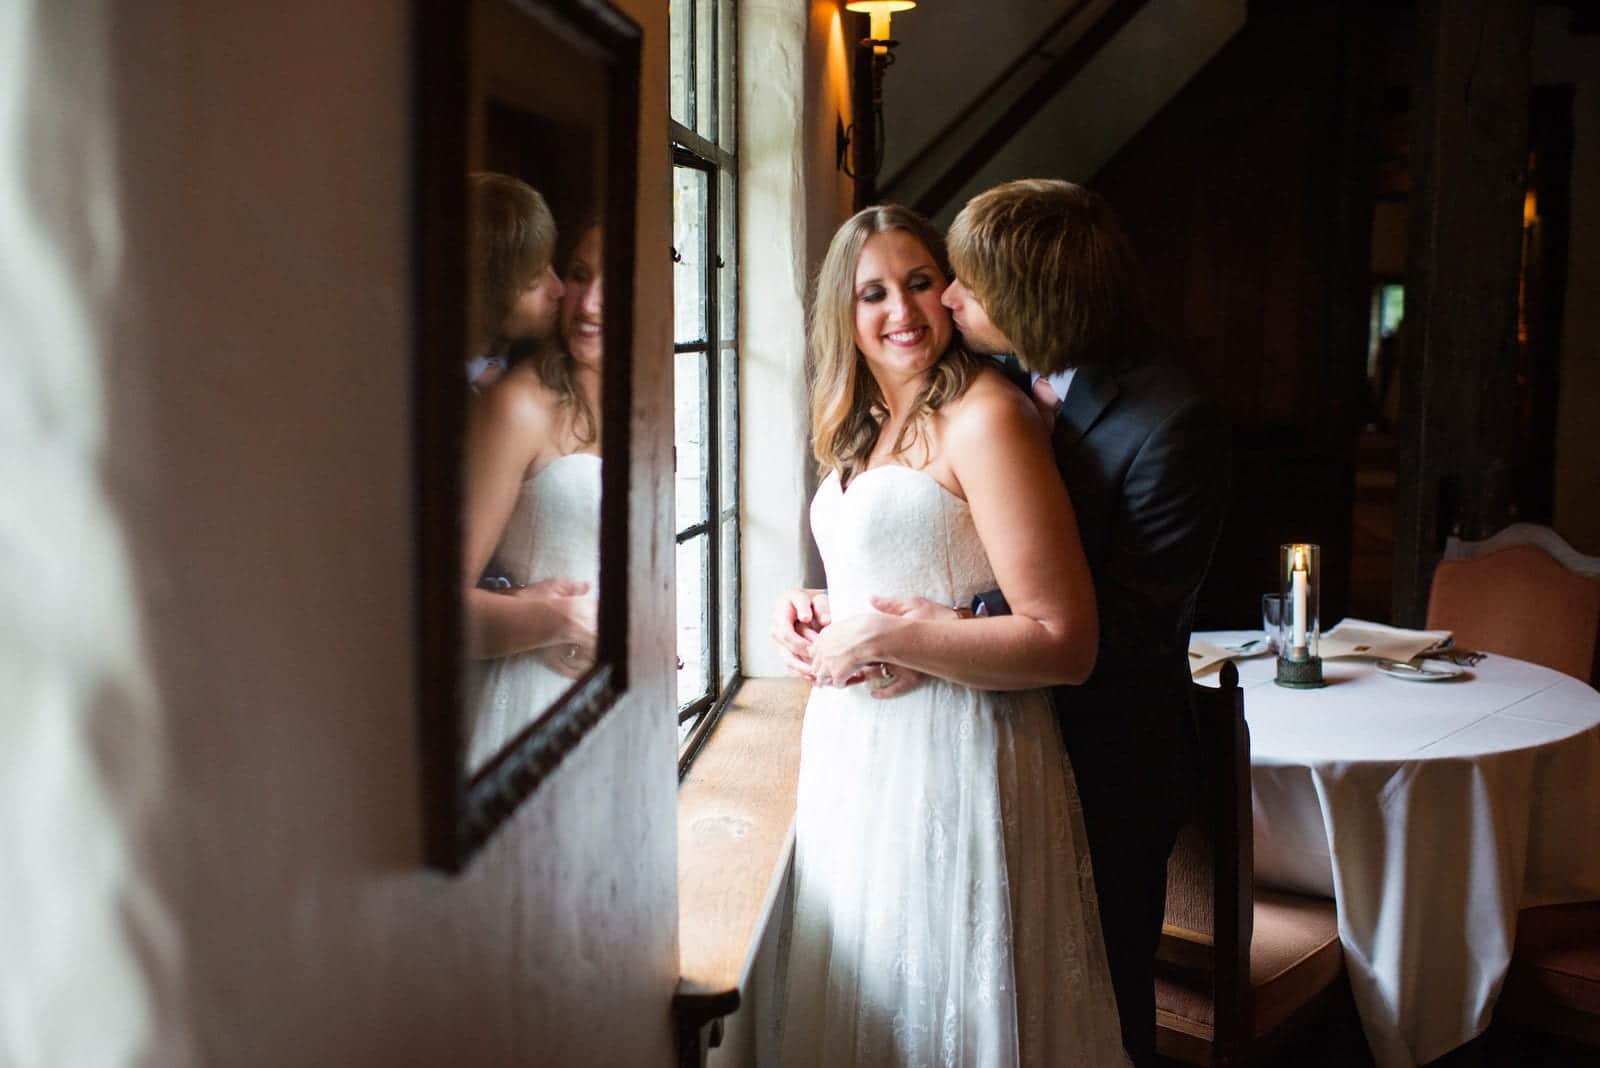 A bride smiles as her groom kisses her cheek in a window during their wedding at the Hyeholde in Moon Township.